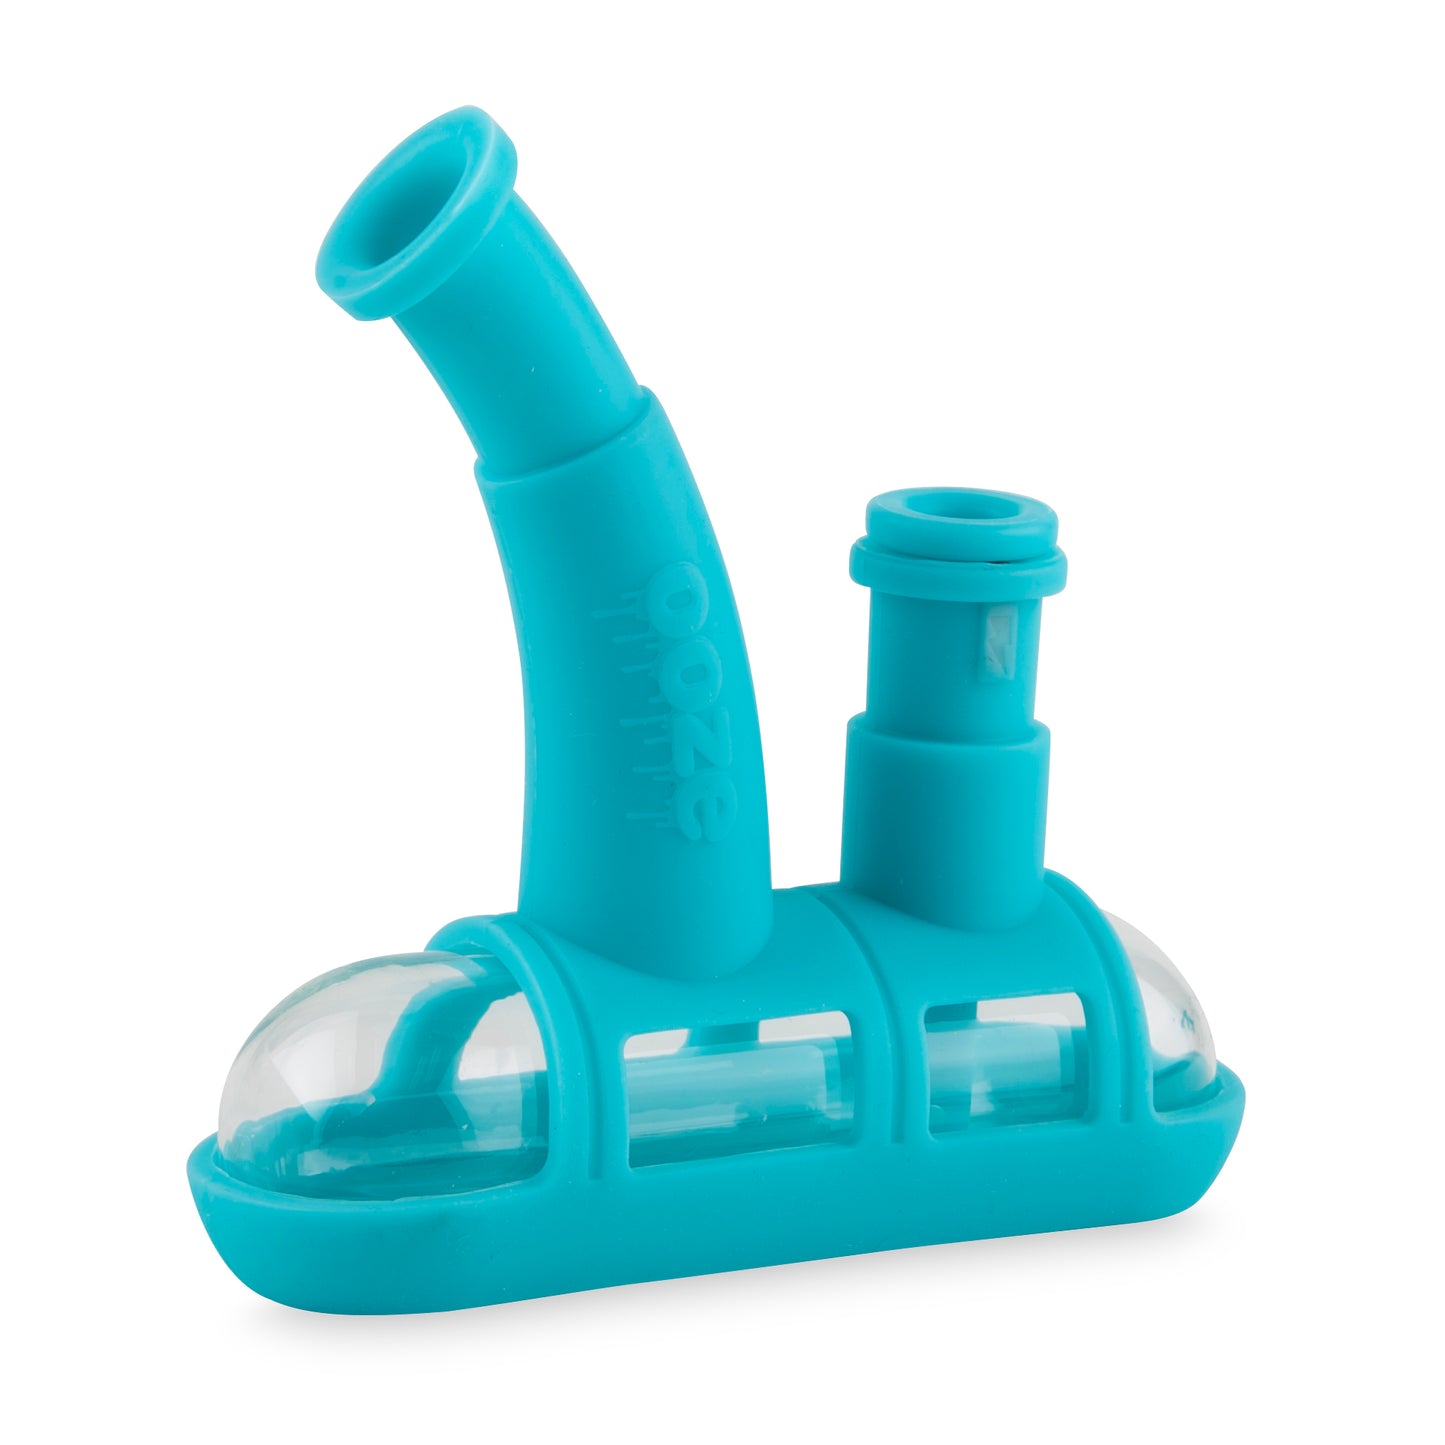 Ooze Steamboat Silicone Water Bubbler & Dab Rig - Aqua Teal